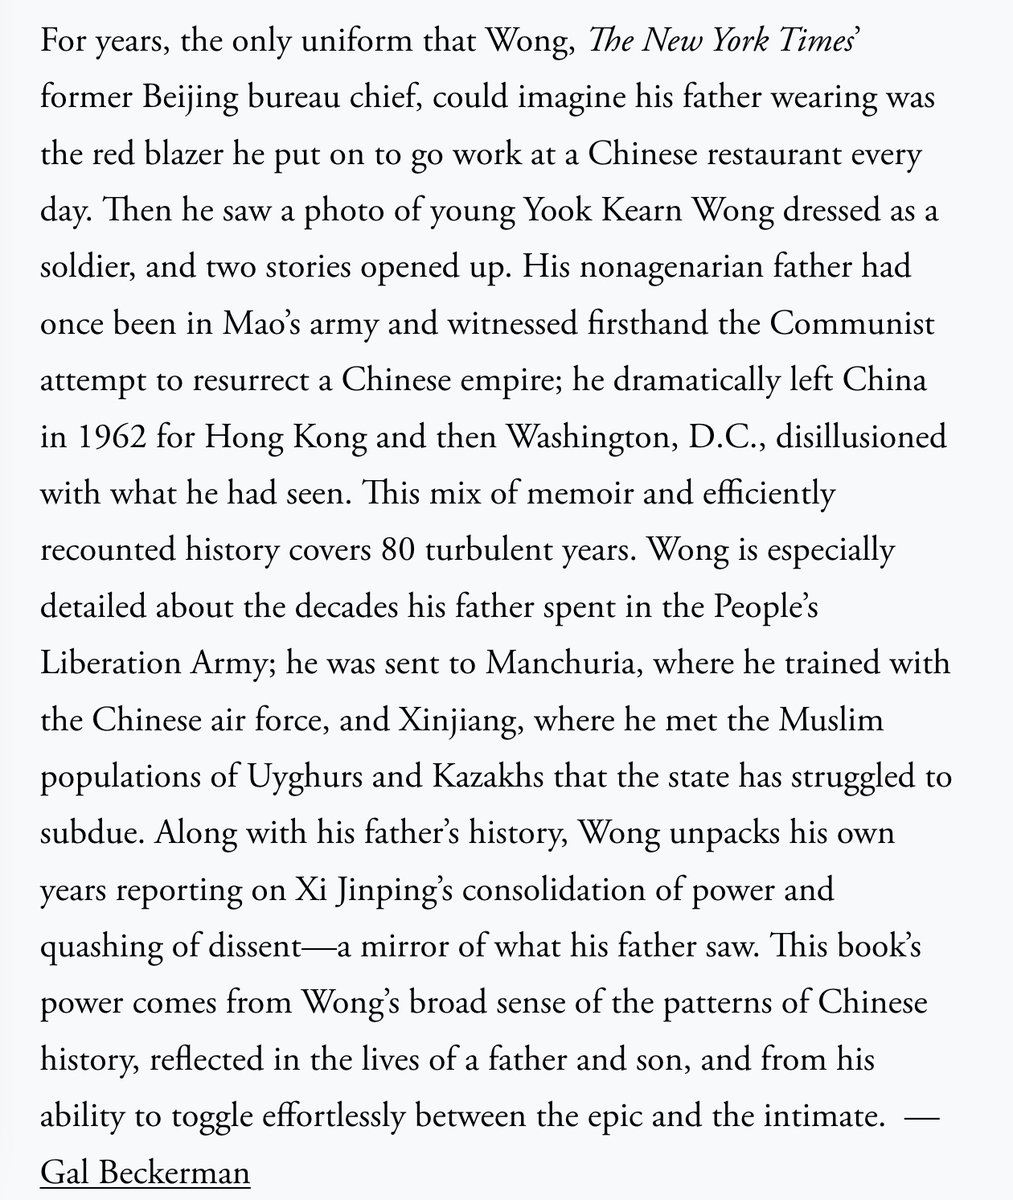 At the Edge of Empire is on The Atlantic's list of 25 summer reads! 'This book’s power comes from Wong’s broad sense of the patterns of Chinese history...and from his ability to toggle effortlessly between the epic and the intimate.' Out 6/25. Order here: penguinrandomhouse.com/books/602734/a…